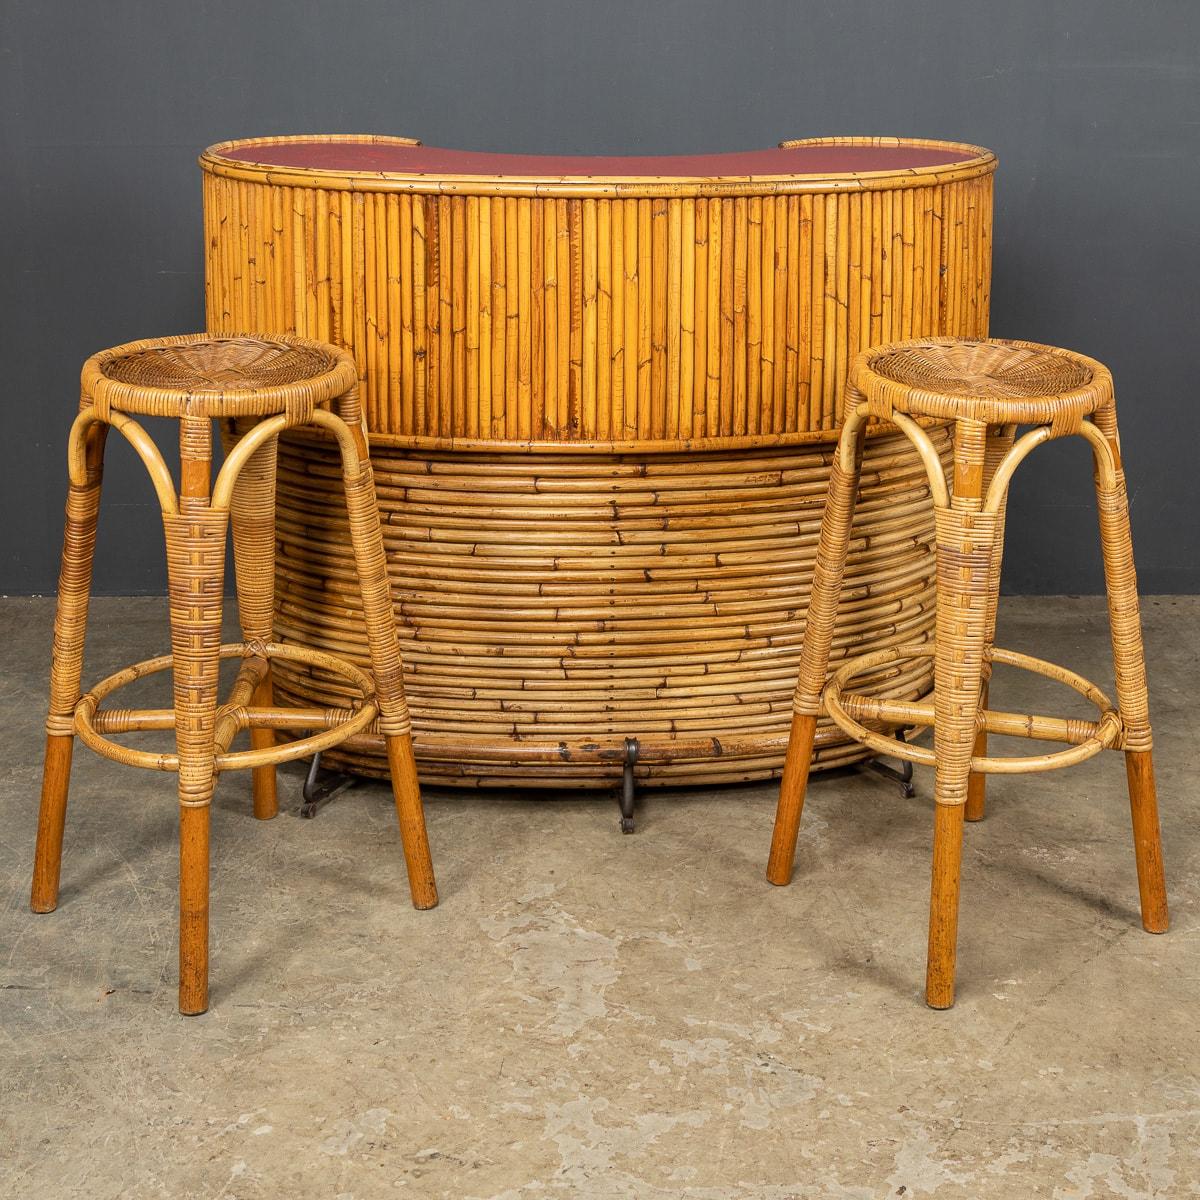 Iconic mid-20th century Italian bar in bamboo with original red bar top and one shelf inside with a pair of bamboo framed rattan stools, made in the late 1950s, when the “Tiki Bar” was all the rage.

CONDITION
In Great Condition - No